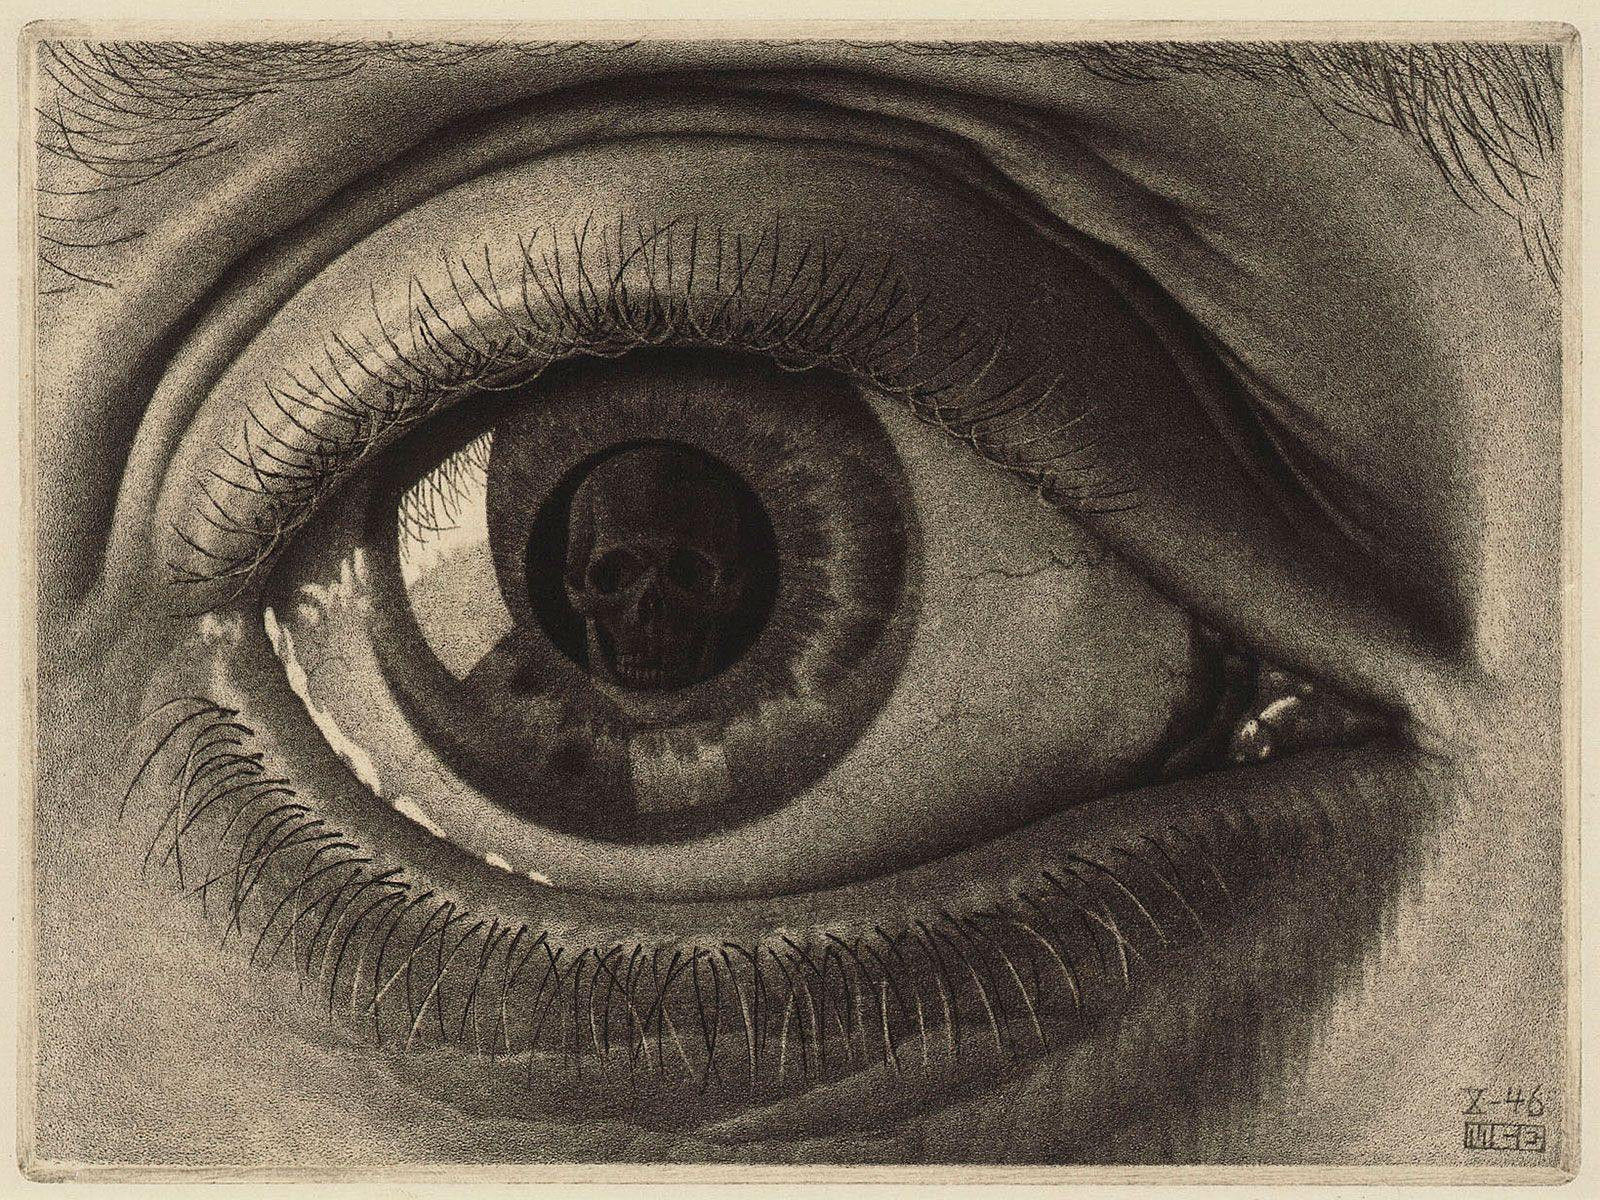   A well-known mezzotint print made by M.C. Escher from 1946, called 'Eye'